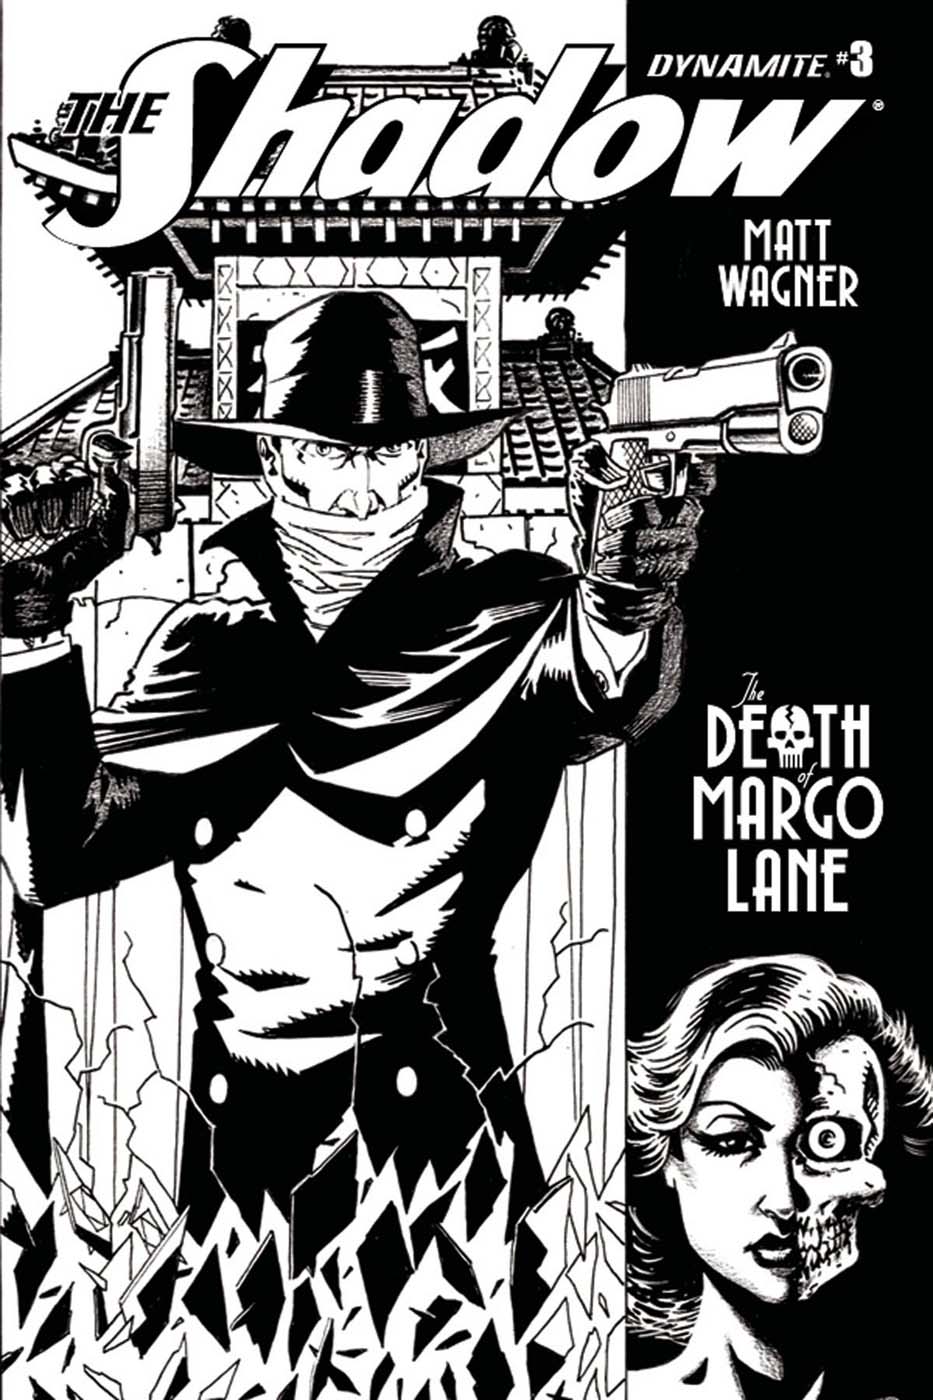 THE SHADOW: THE DEATH OF MARGO LANE #3